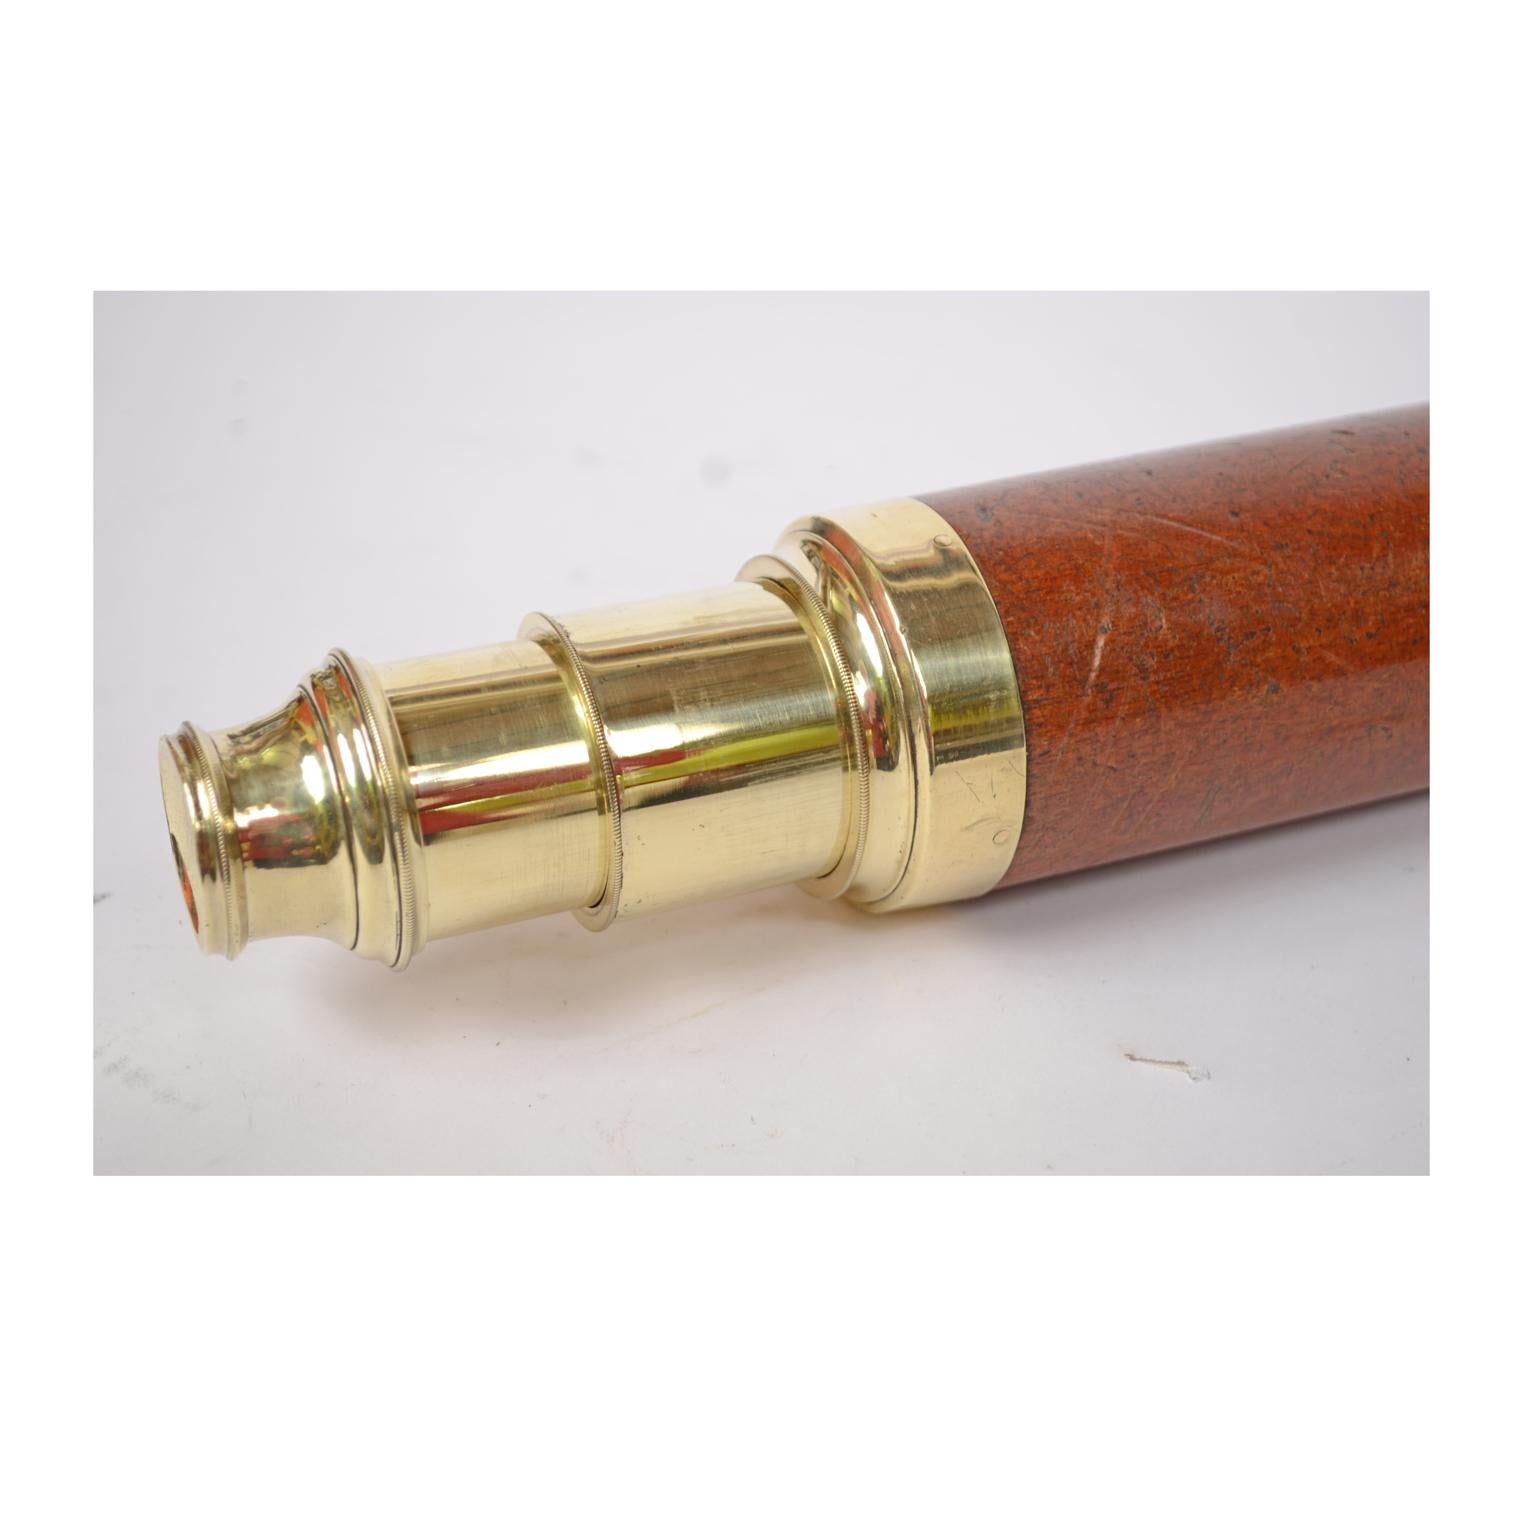 Early 19th Century Large Brass Telescope with Mahogany Wooden Handle Made in UK in the Early 1800s